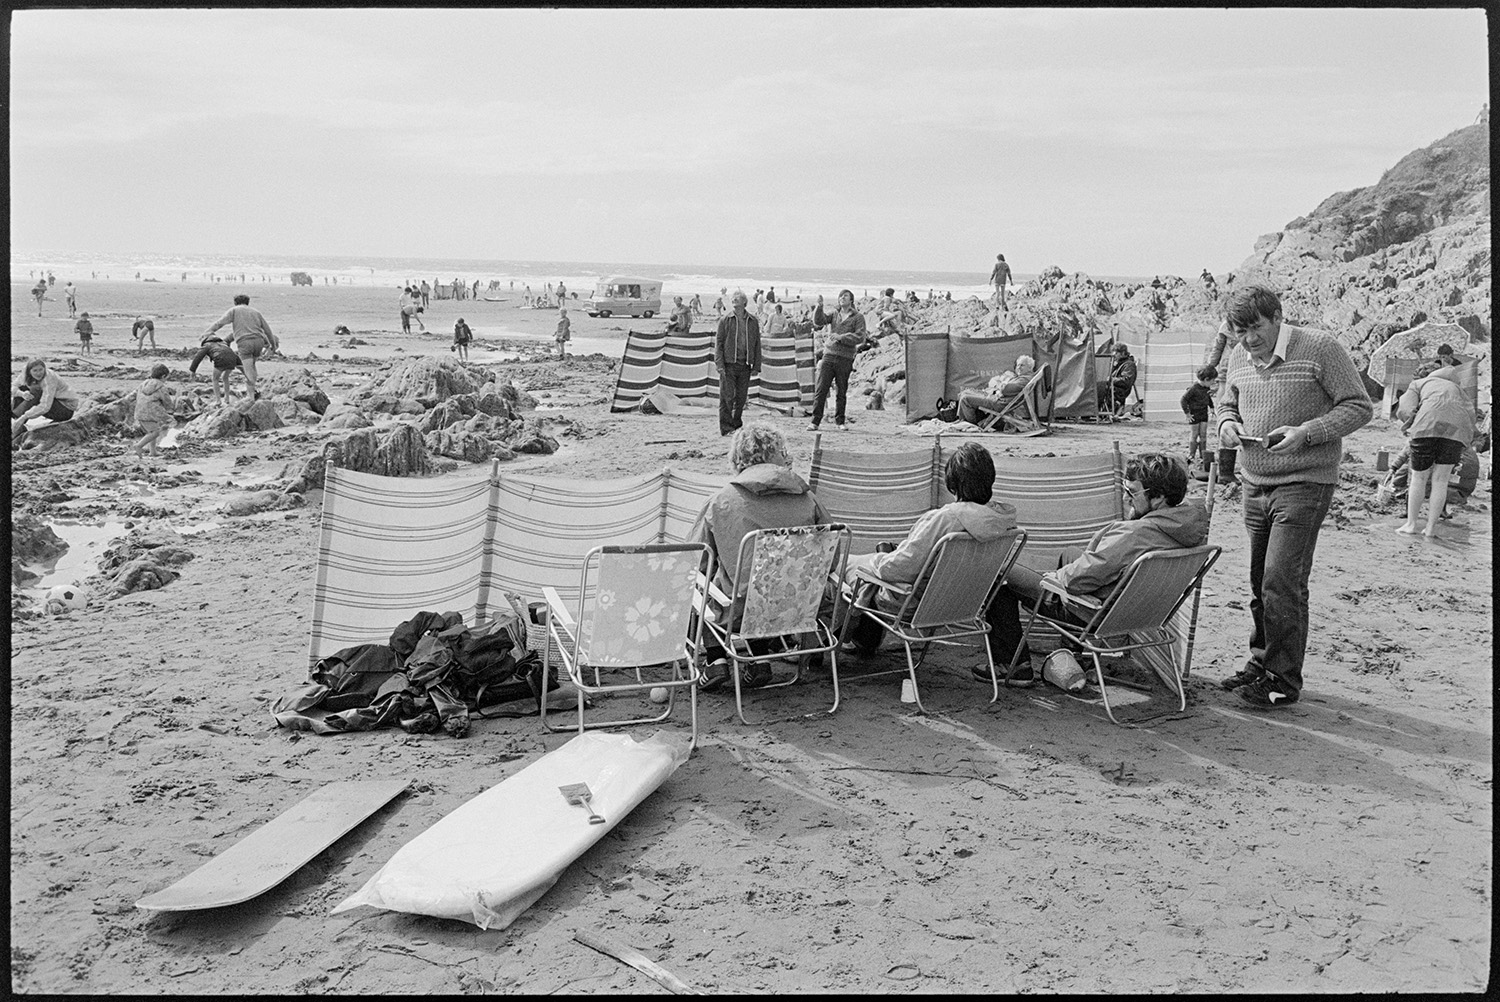 Beach scenes, people sitting behind windbreaks.
[Holidaymakers on Woolacombe beach sitting on garden chairs behind a windbreak. Surfboards are lying on the beach behind them. Other holidaymakers, an ice cream van and the sea are visible in the background.]